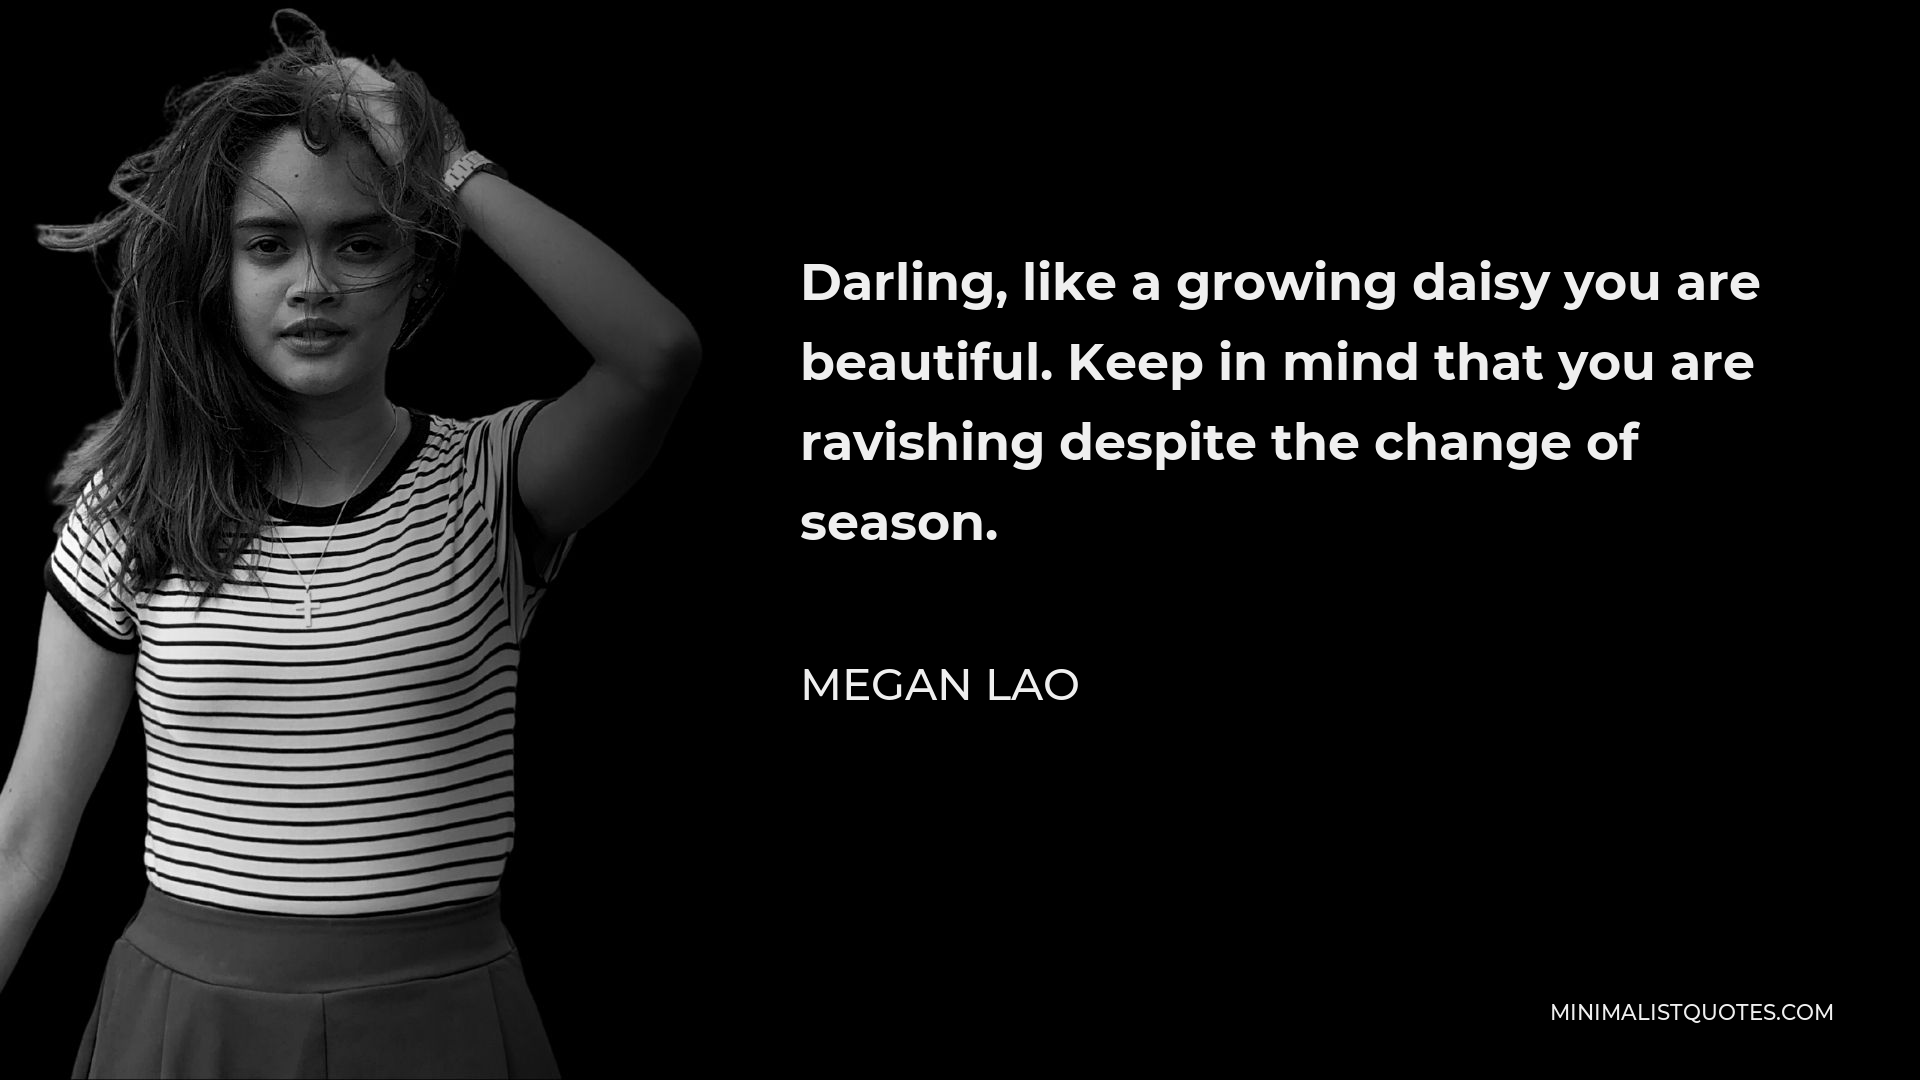 Megan Lao Quote - Darling, like a growing daisy you are beautiful. Keep in mind that you are ravishing despite the change of season.